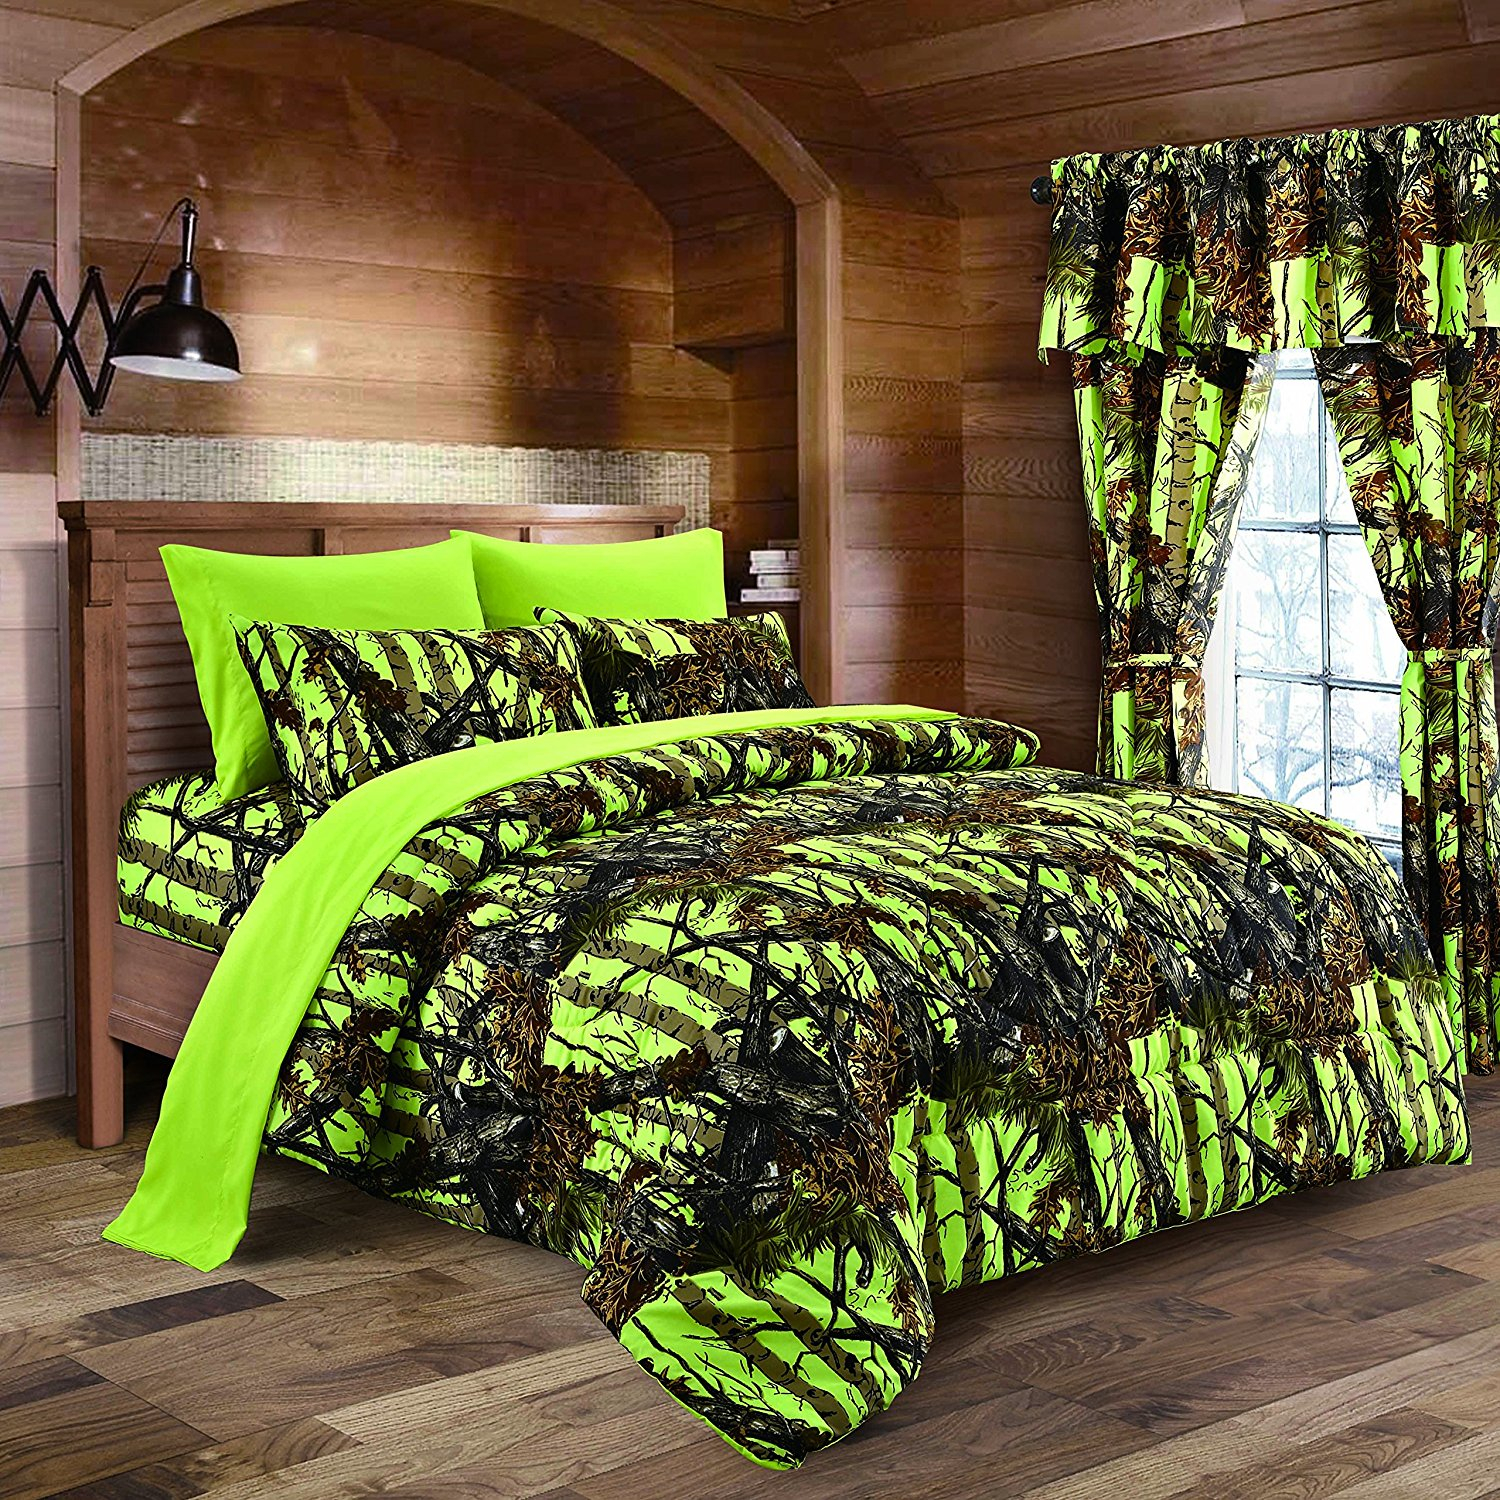 Lime Camouflage Queen Size 8pc Comforter Sheet Pillowcases And Bed Skirt Set Camo Bedding Sheet Set For Hunters Teens Boys And Girls for measurements 1500 X 1500